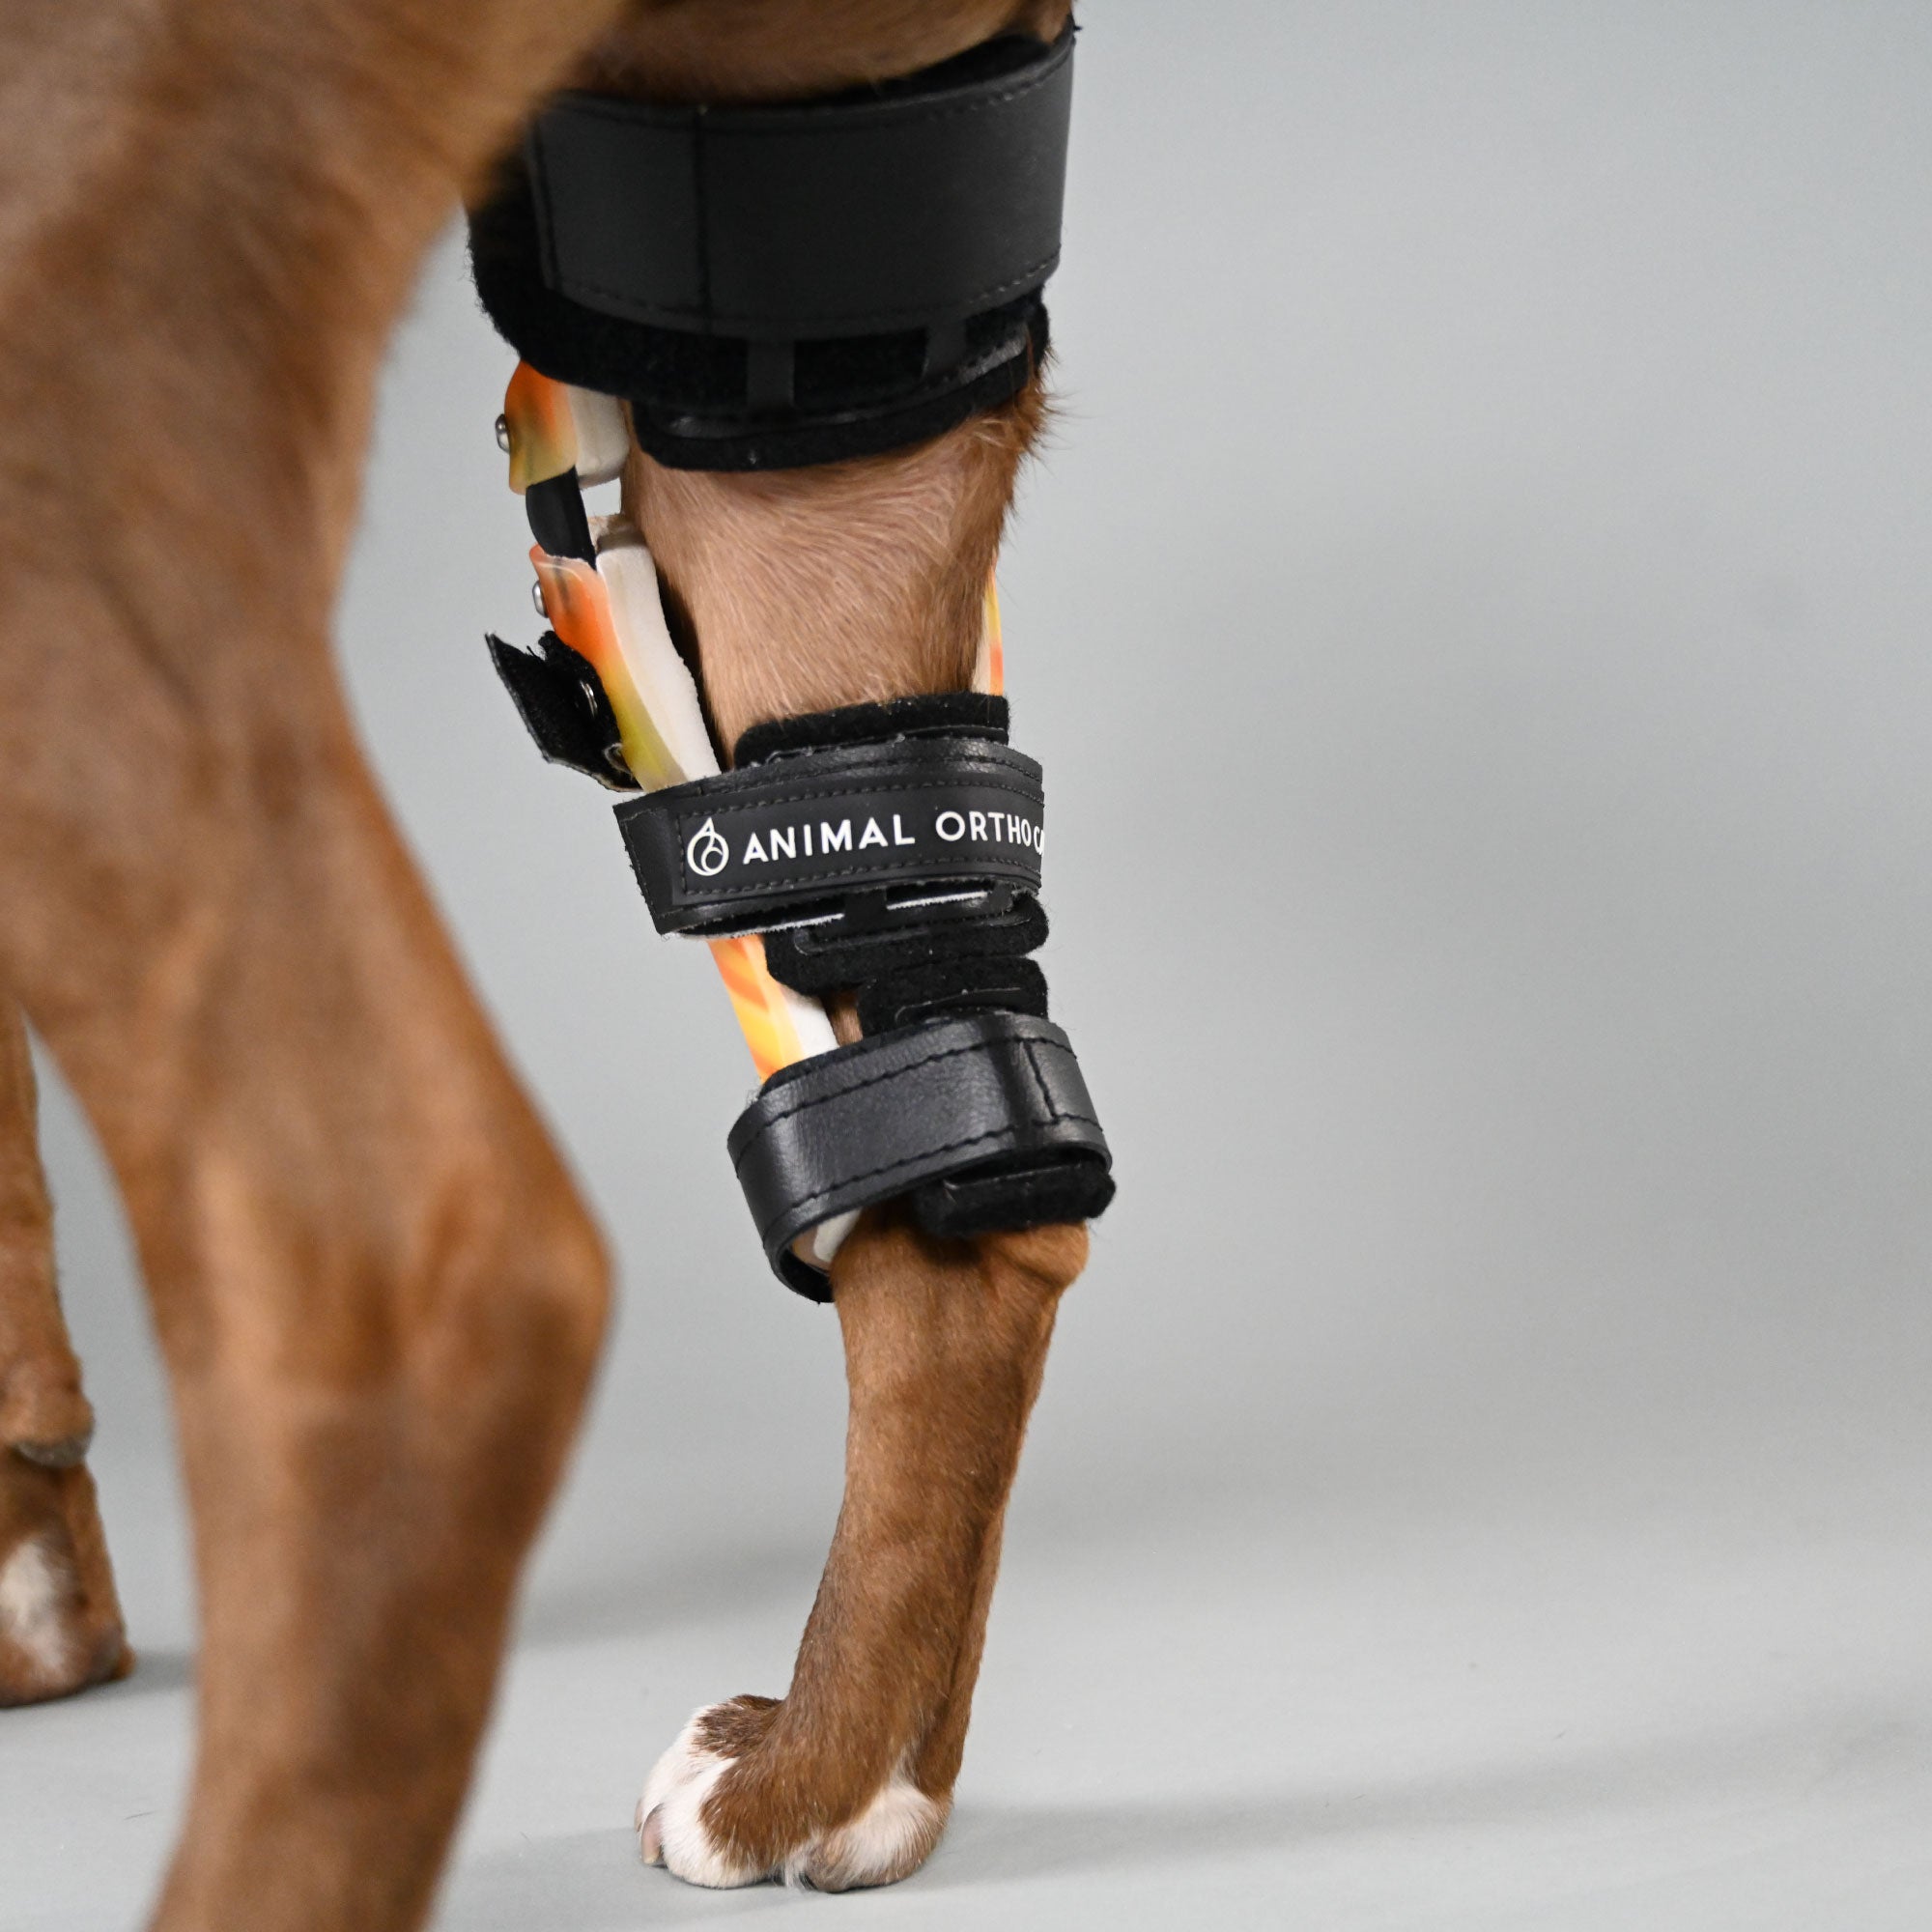 Dog Knee Brace for Sale - Get Quality Back Leg Support for Dogs